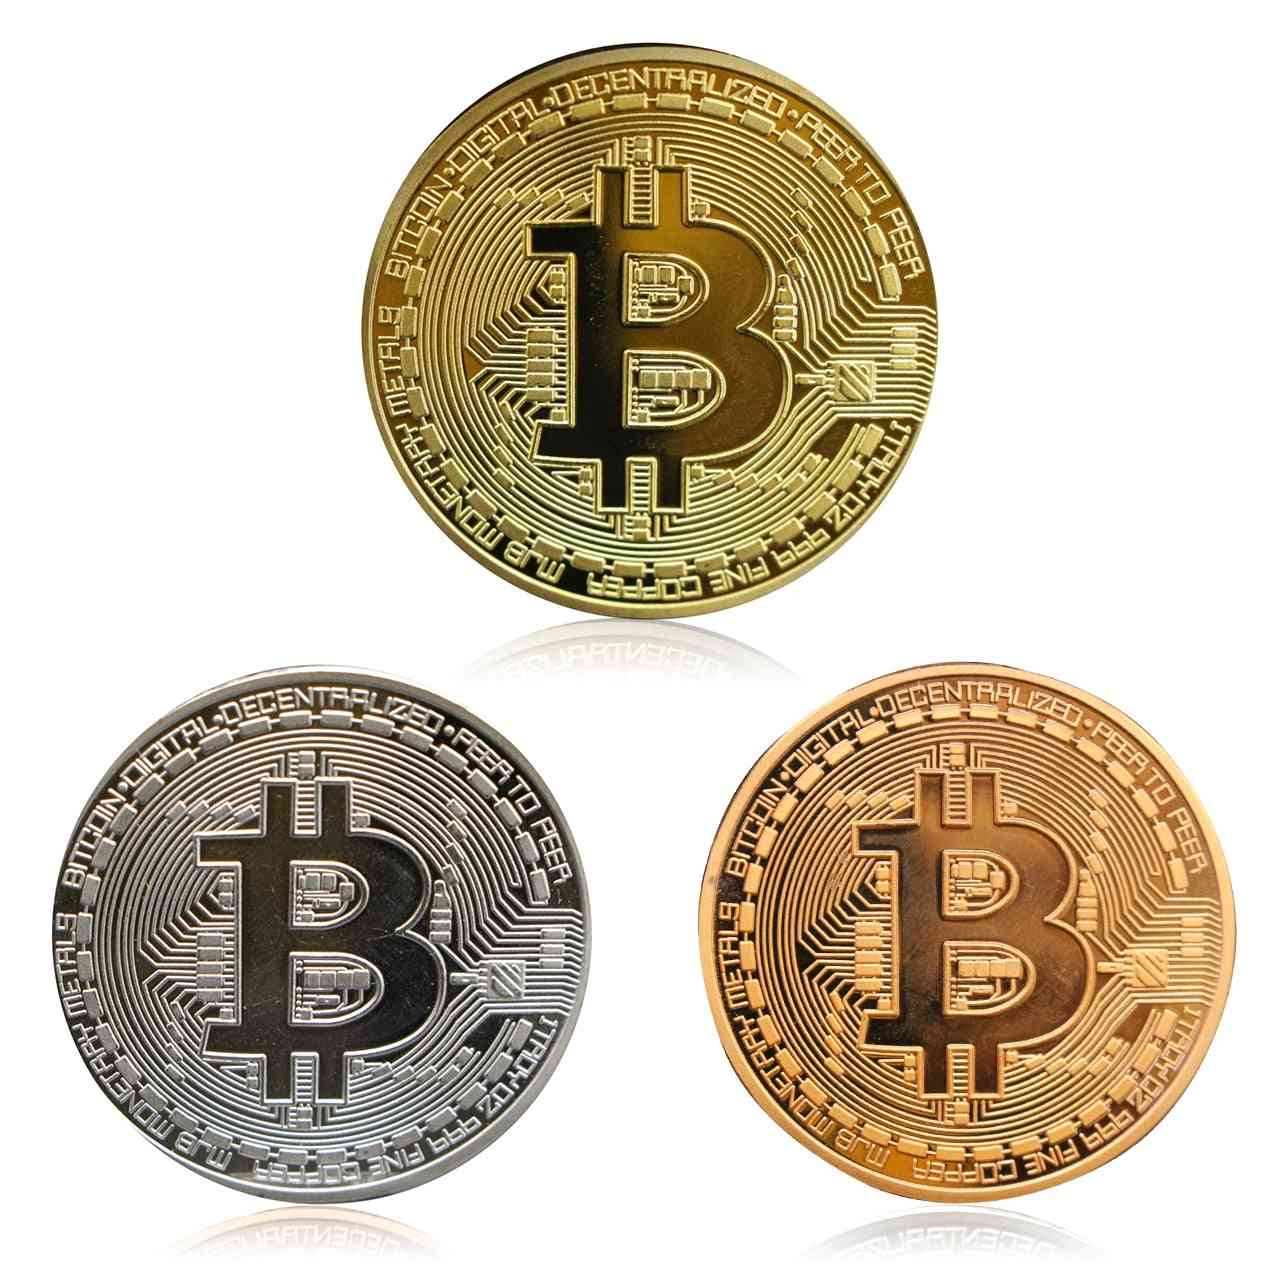 Bitcoins Physical Metal Fictitious Currency- Commemorative Medal